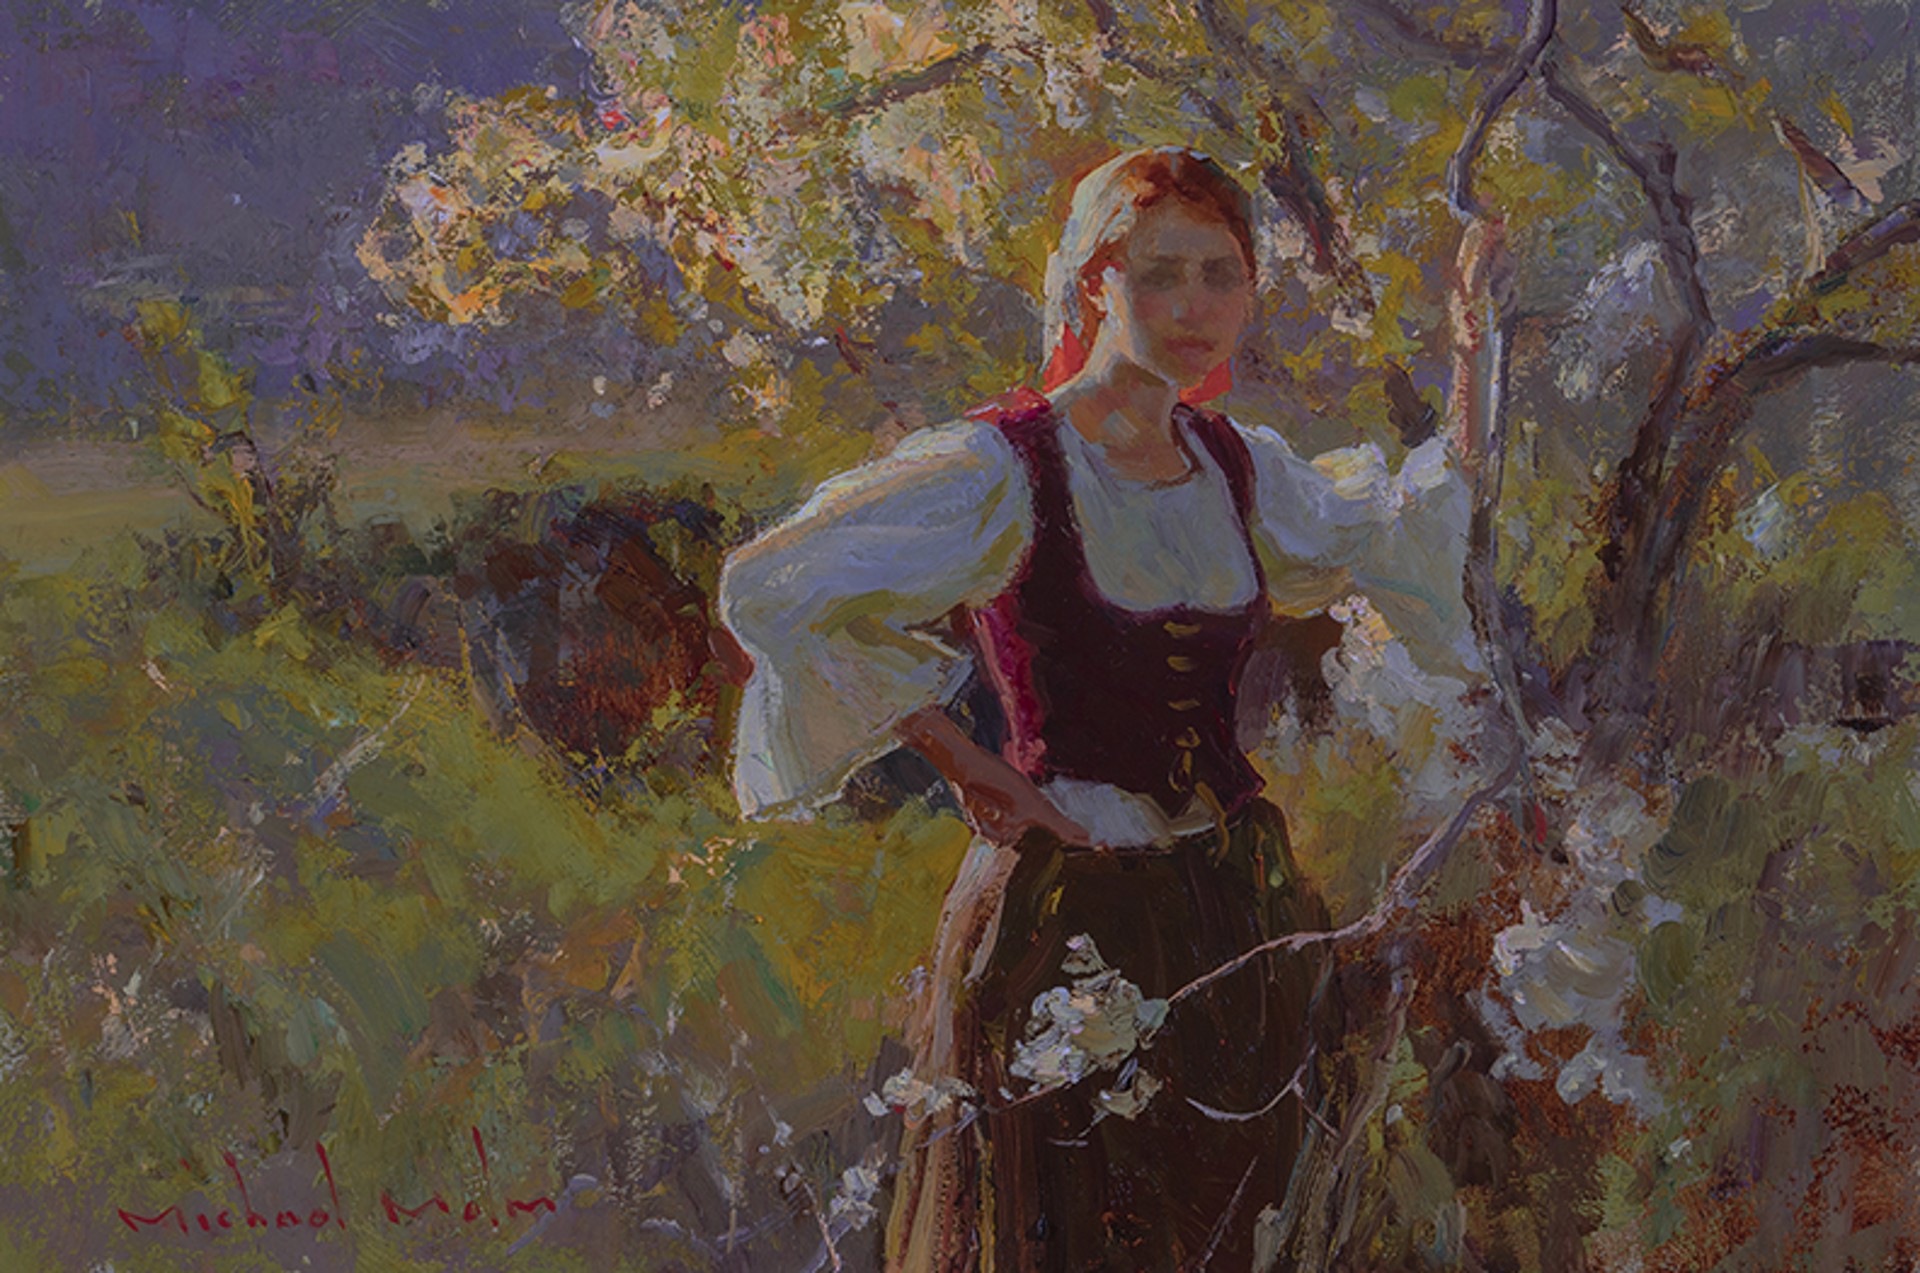 Spring Blossoms by Michael Malm